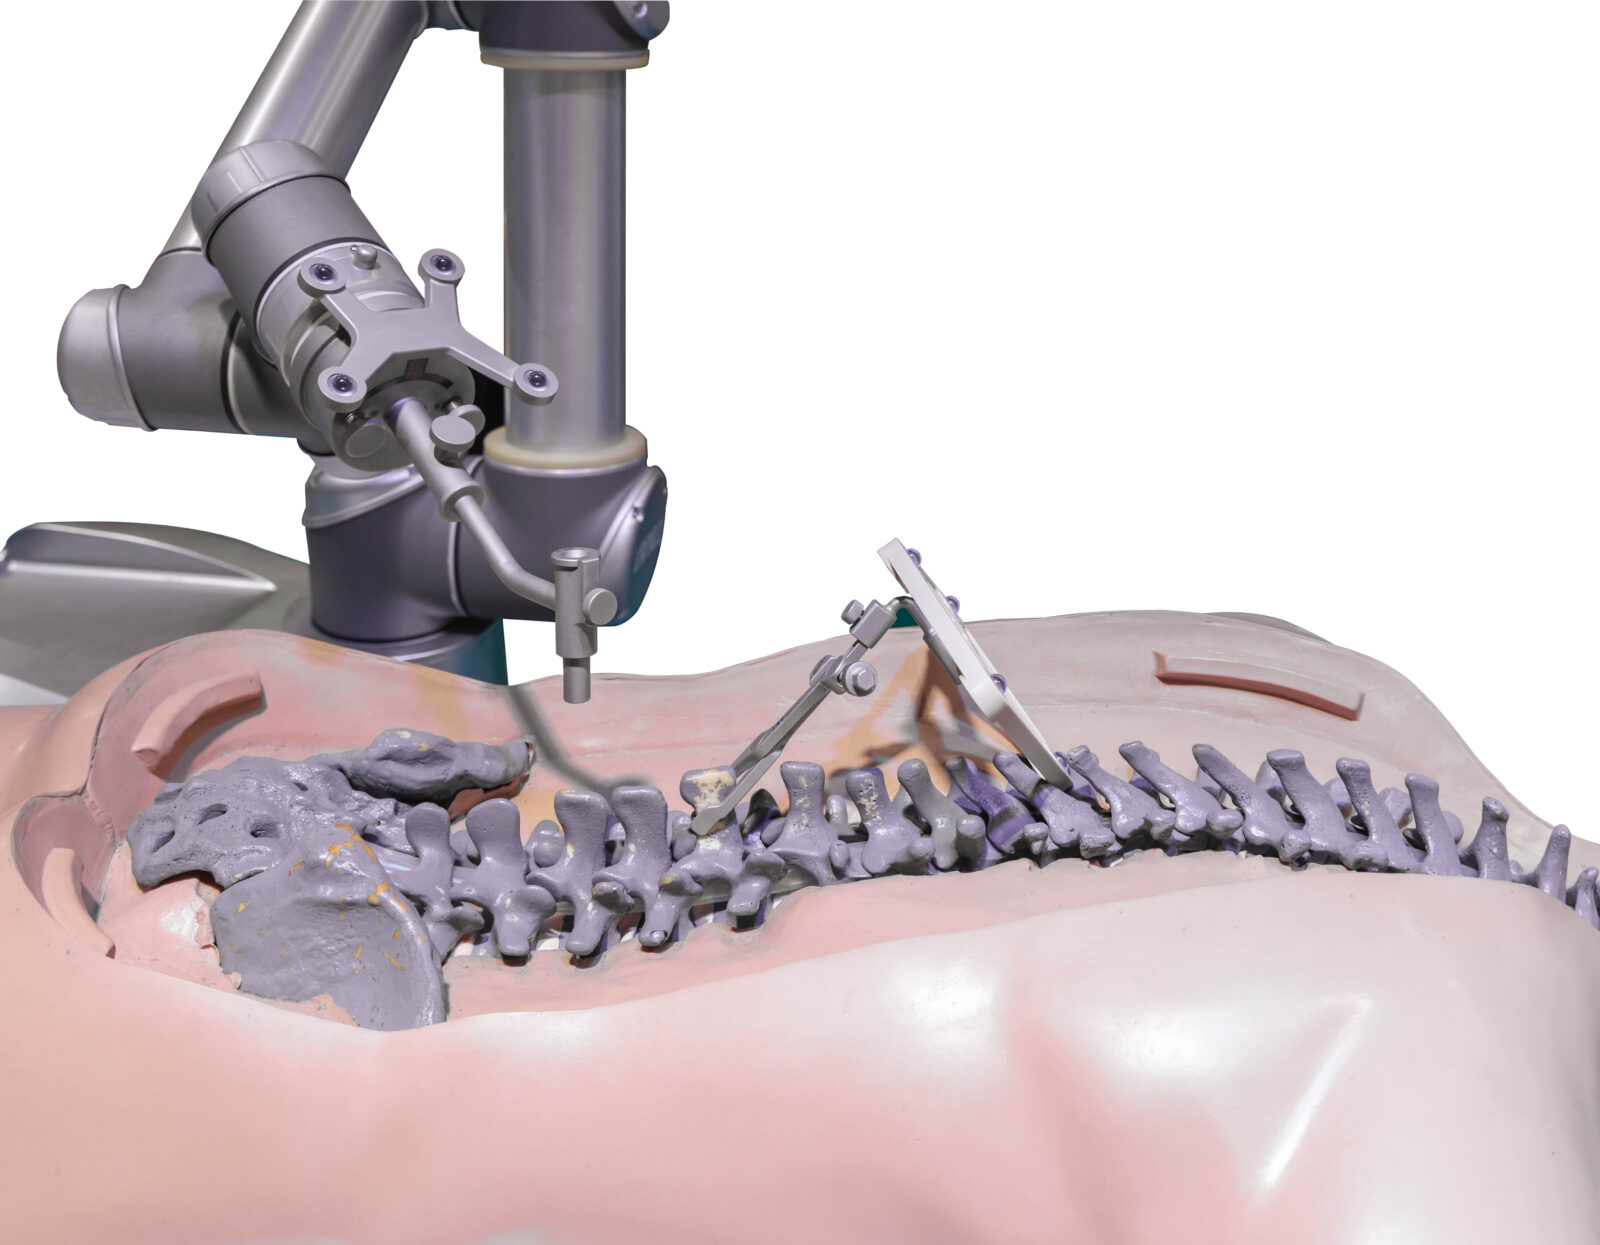 5fe37b f64f819b43e84a7193de6e5b94bf63fd mv2 showing the concept of Robotic Spine Surgery & Augmented Reality